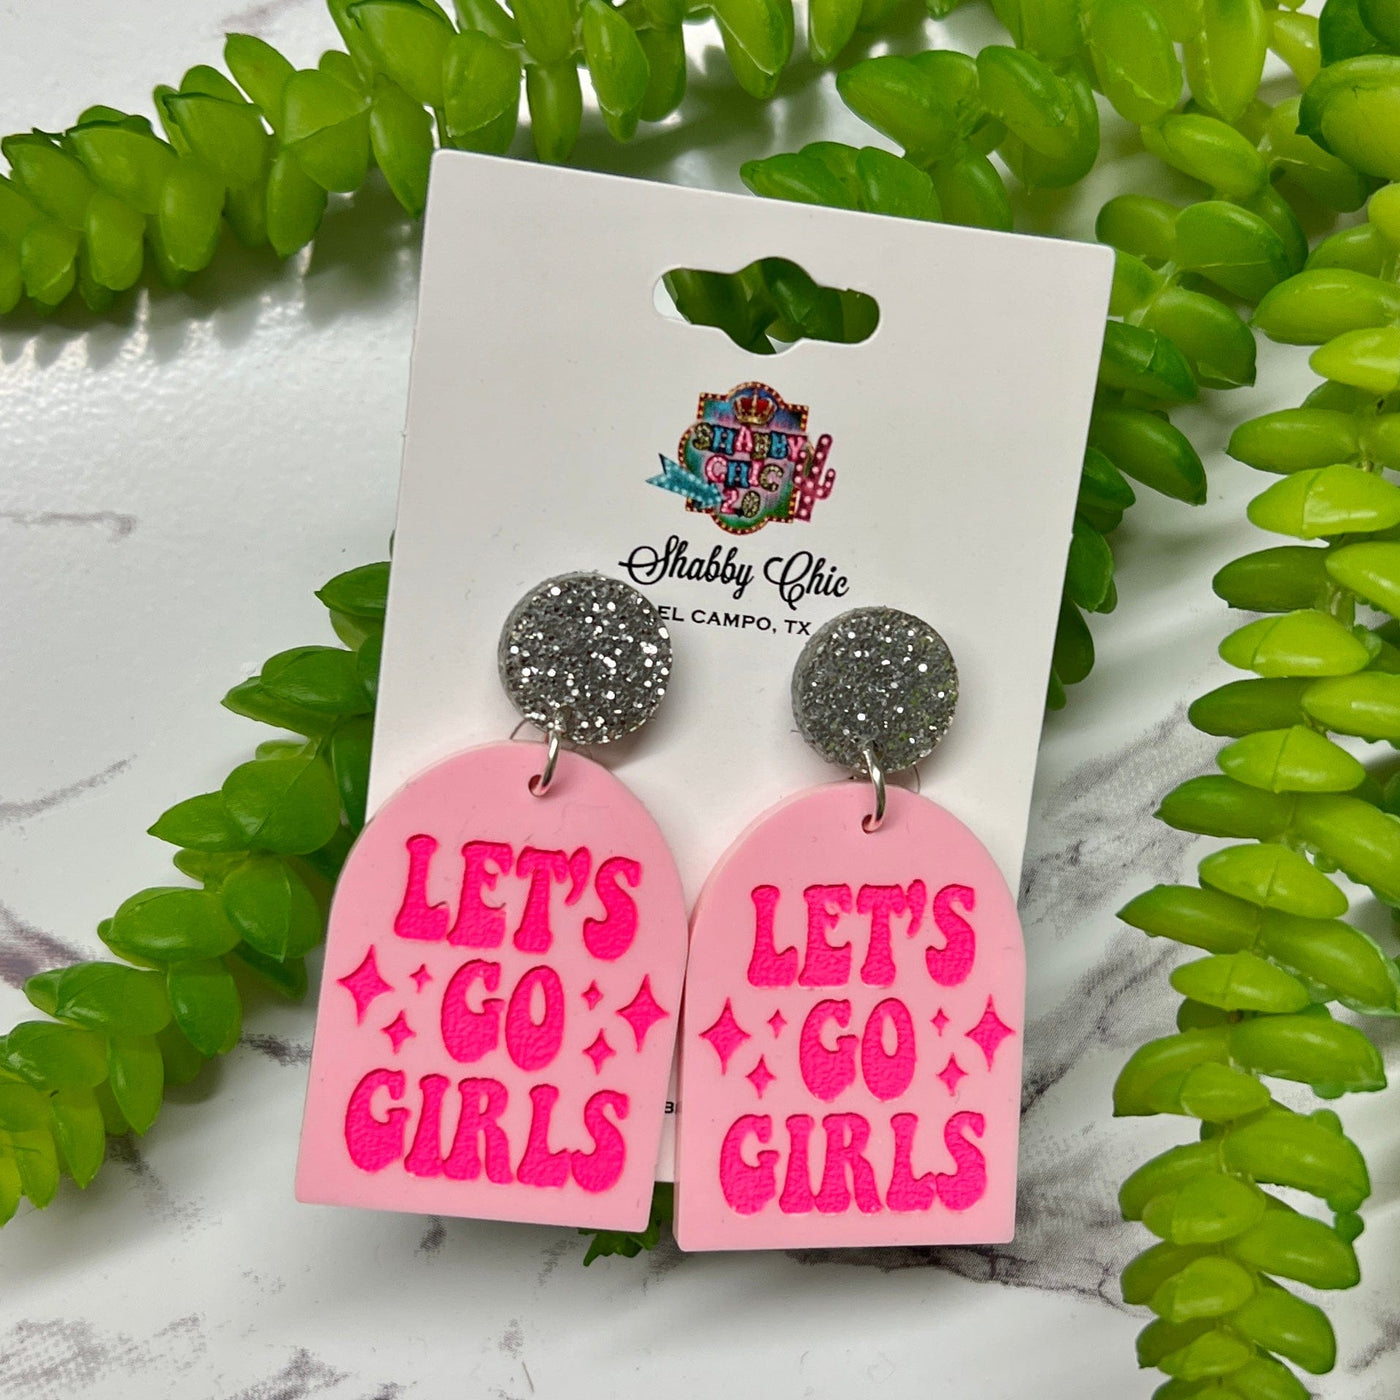 Let's Go Girls Earrings Shabby Chic Boutique and Tanning Salon